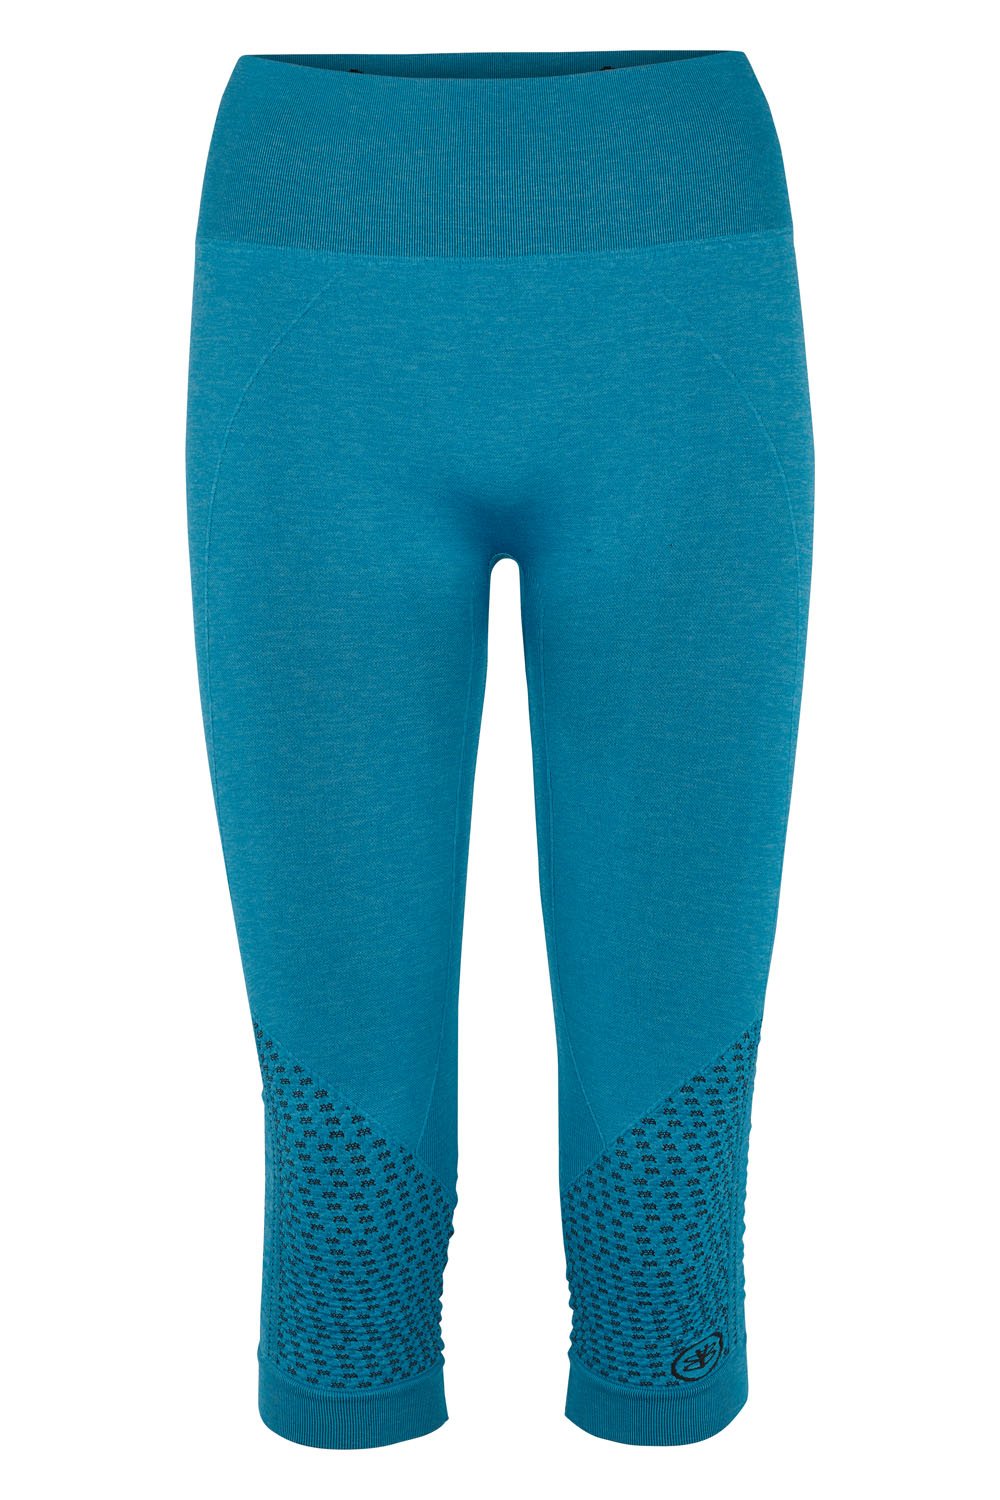 Beluga Classic Tights 3/4 - Front - Turquoise